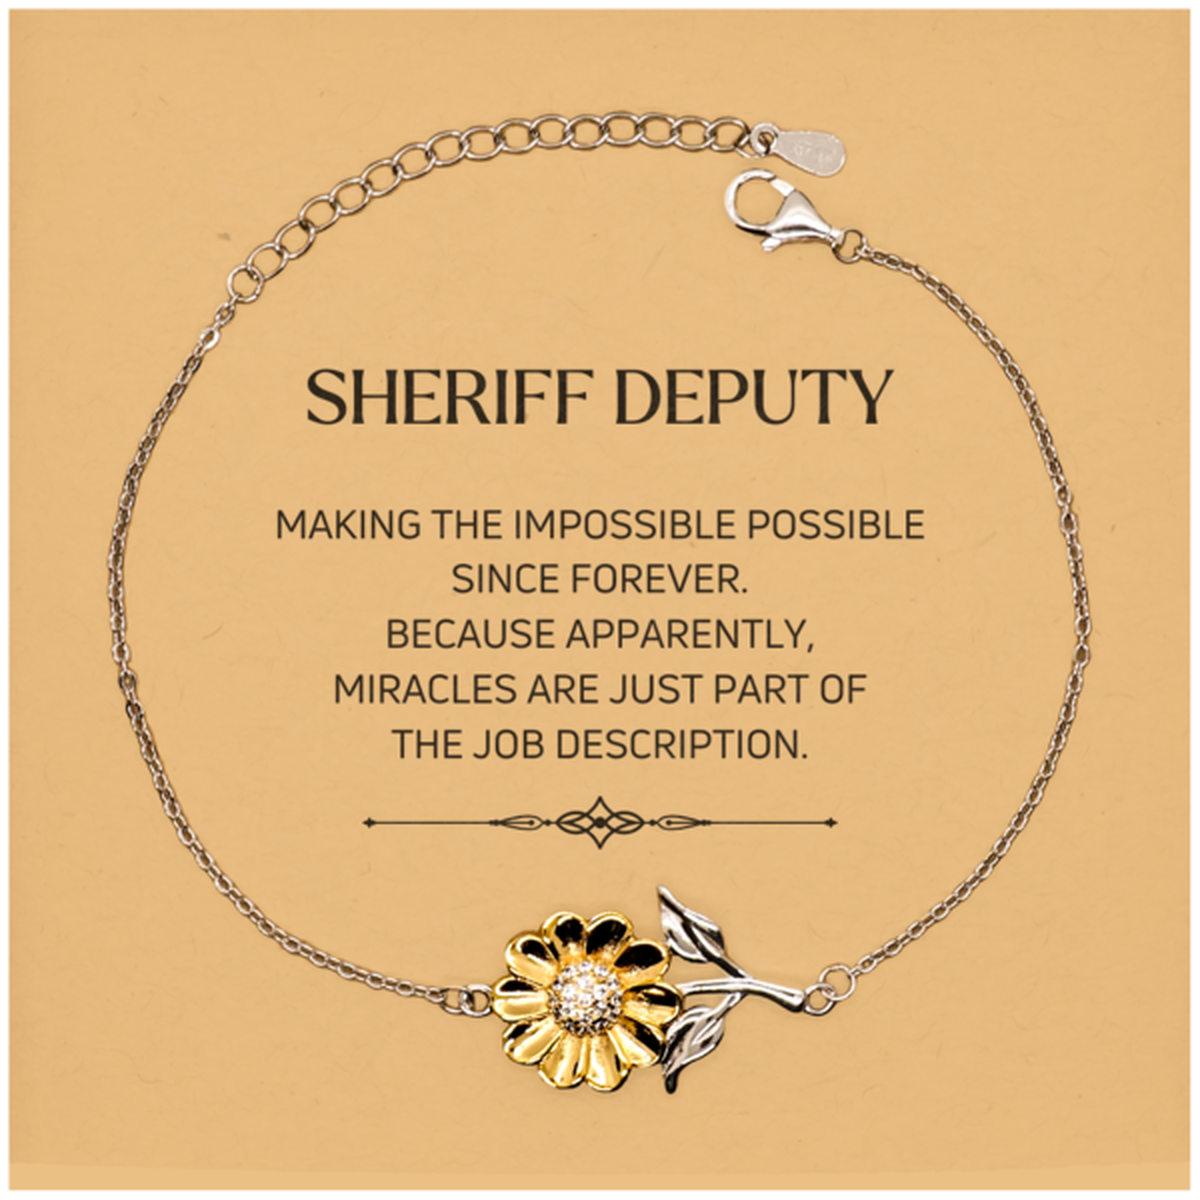 Funny Sheriff Deputy Gifts, Miracles are just part of the job description, Inspirational Birthday Christmas Sunflower Bracelet For Sheriff Deputy, Men, Women, Coworkers, Friends, Boss